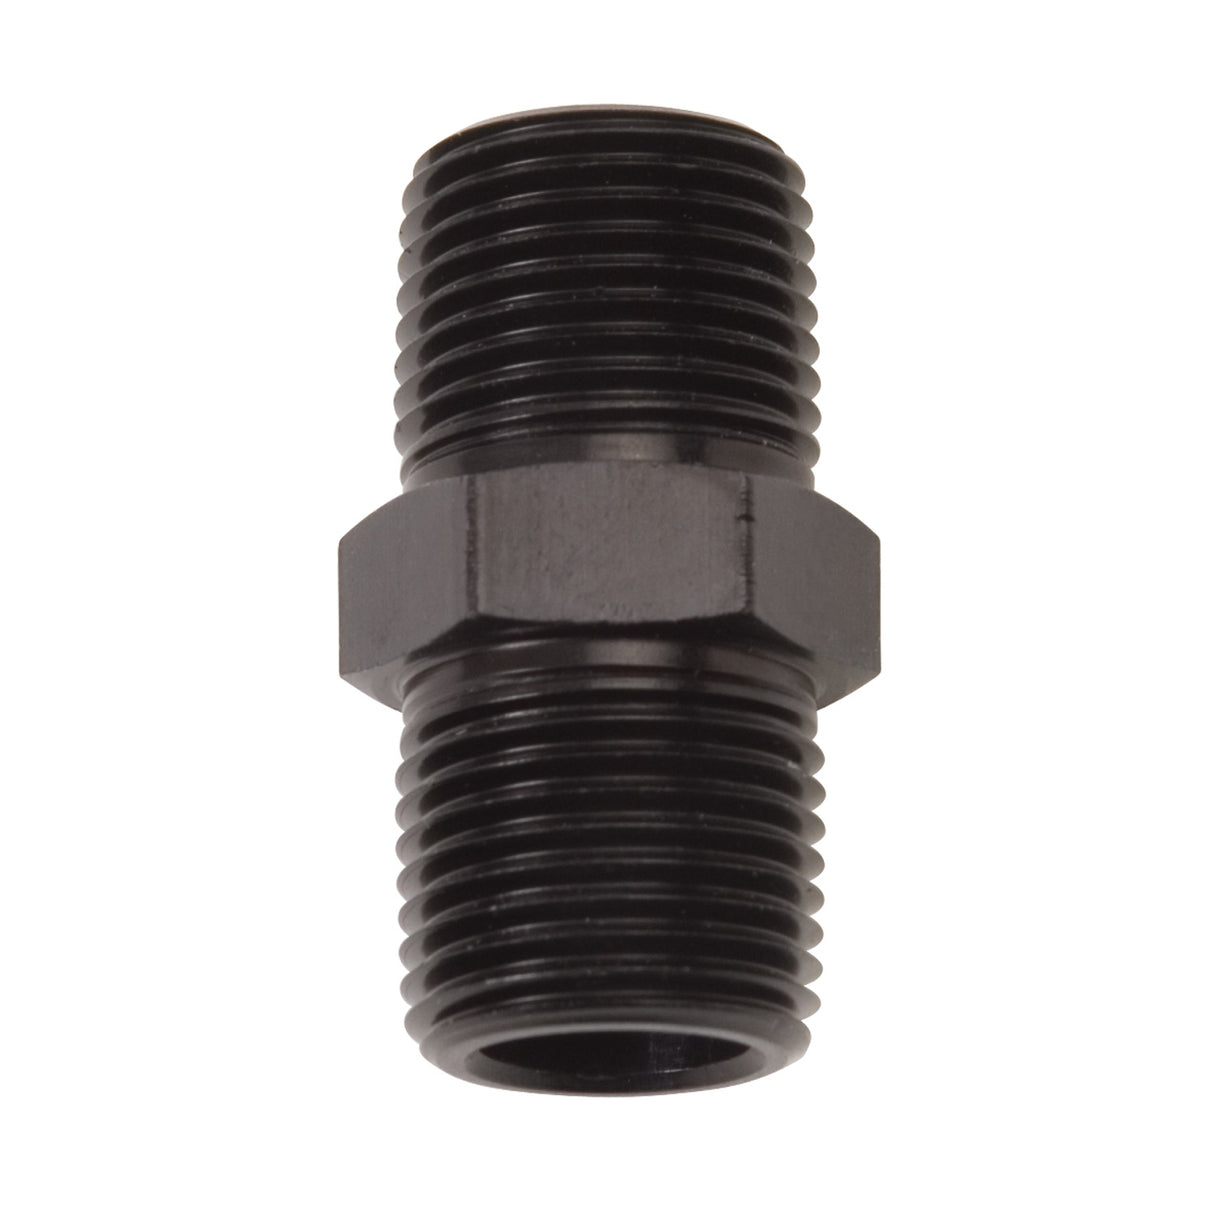 661523 | FITTING 3/8" NPT MALE TO 3/8" NPT MALE BLK ANODIZED